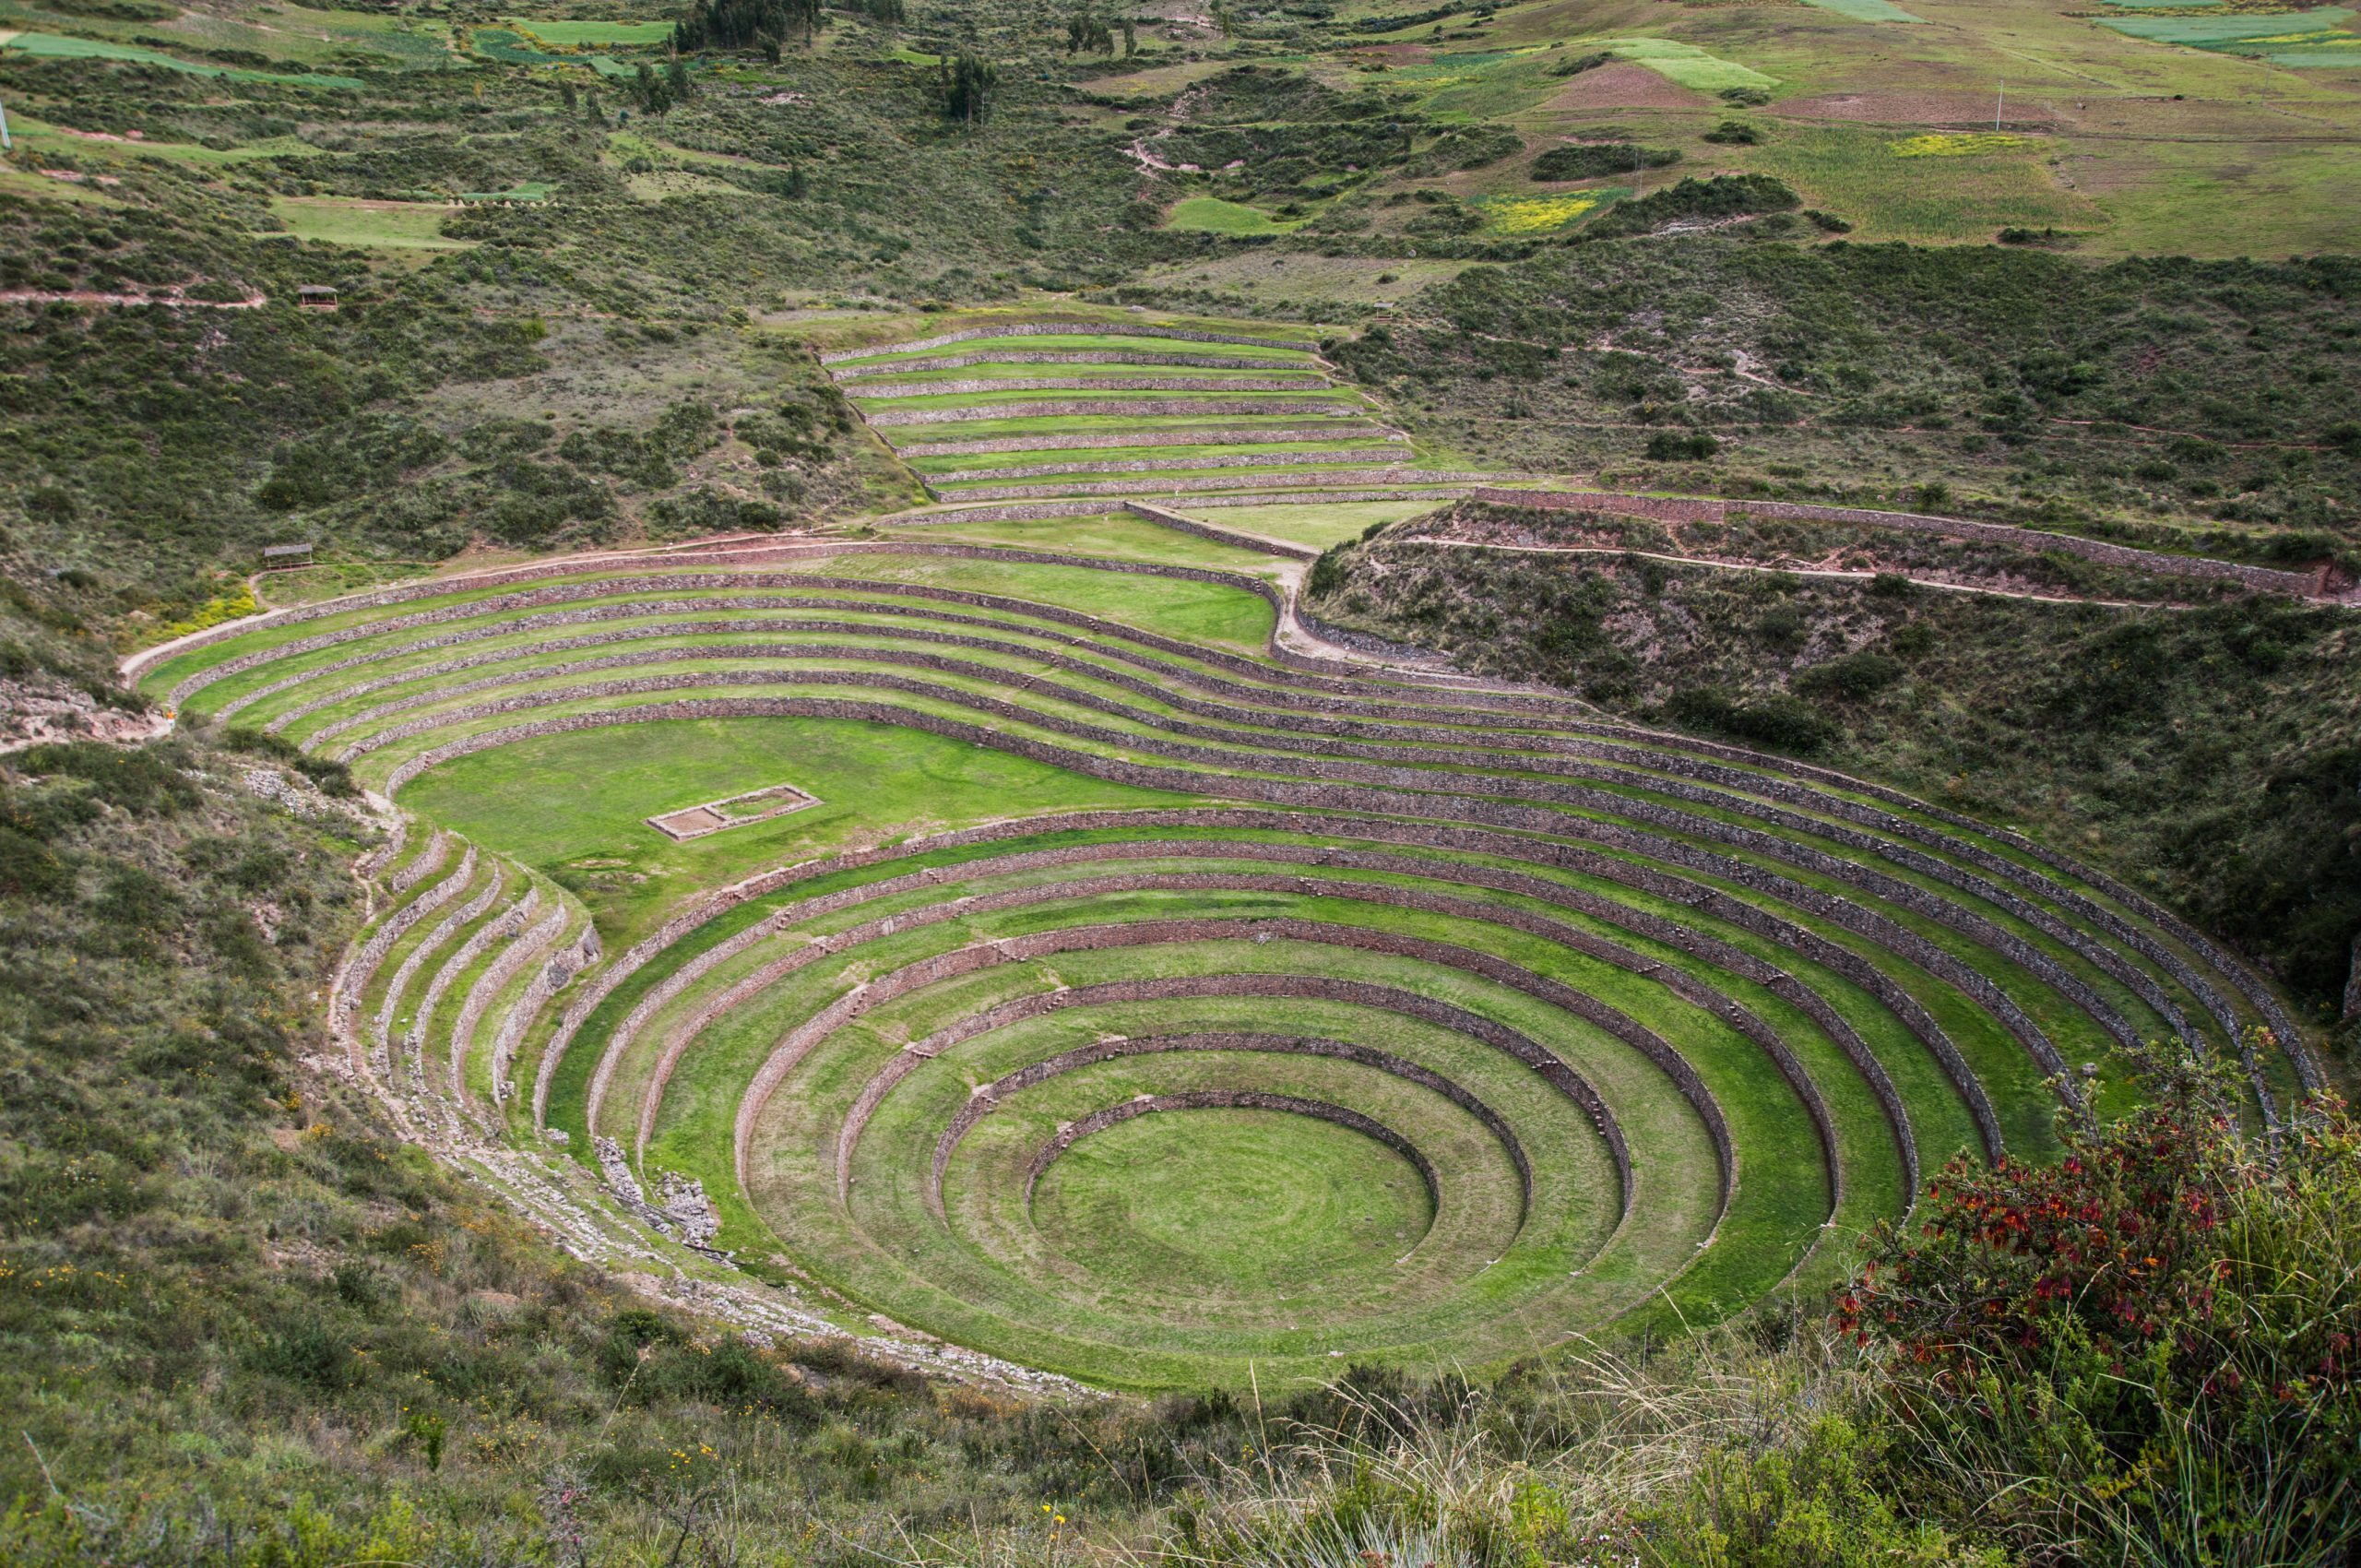 The South Agricultural Terraces